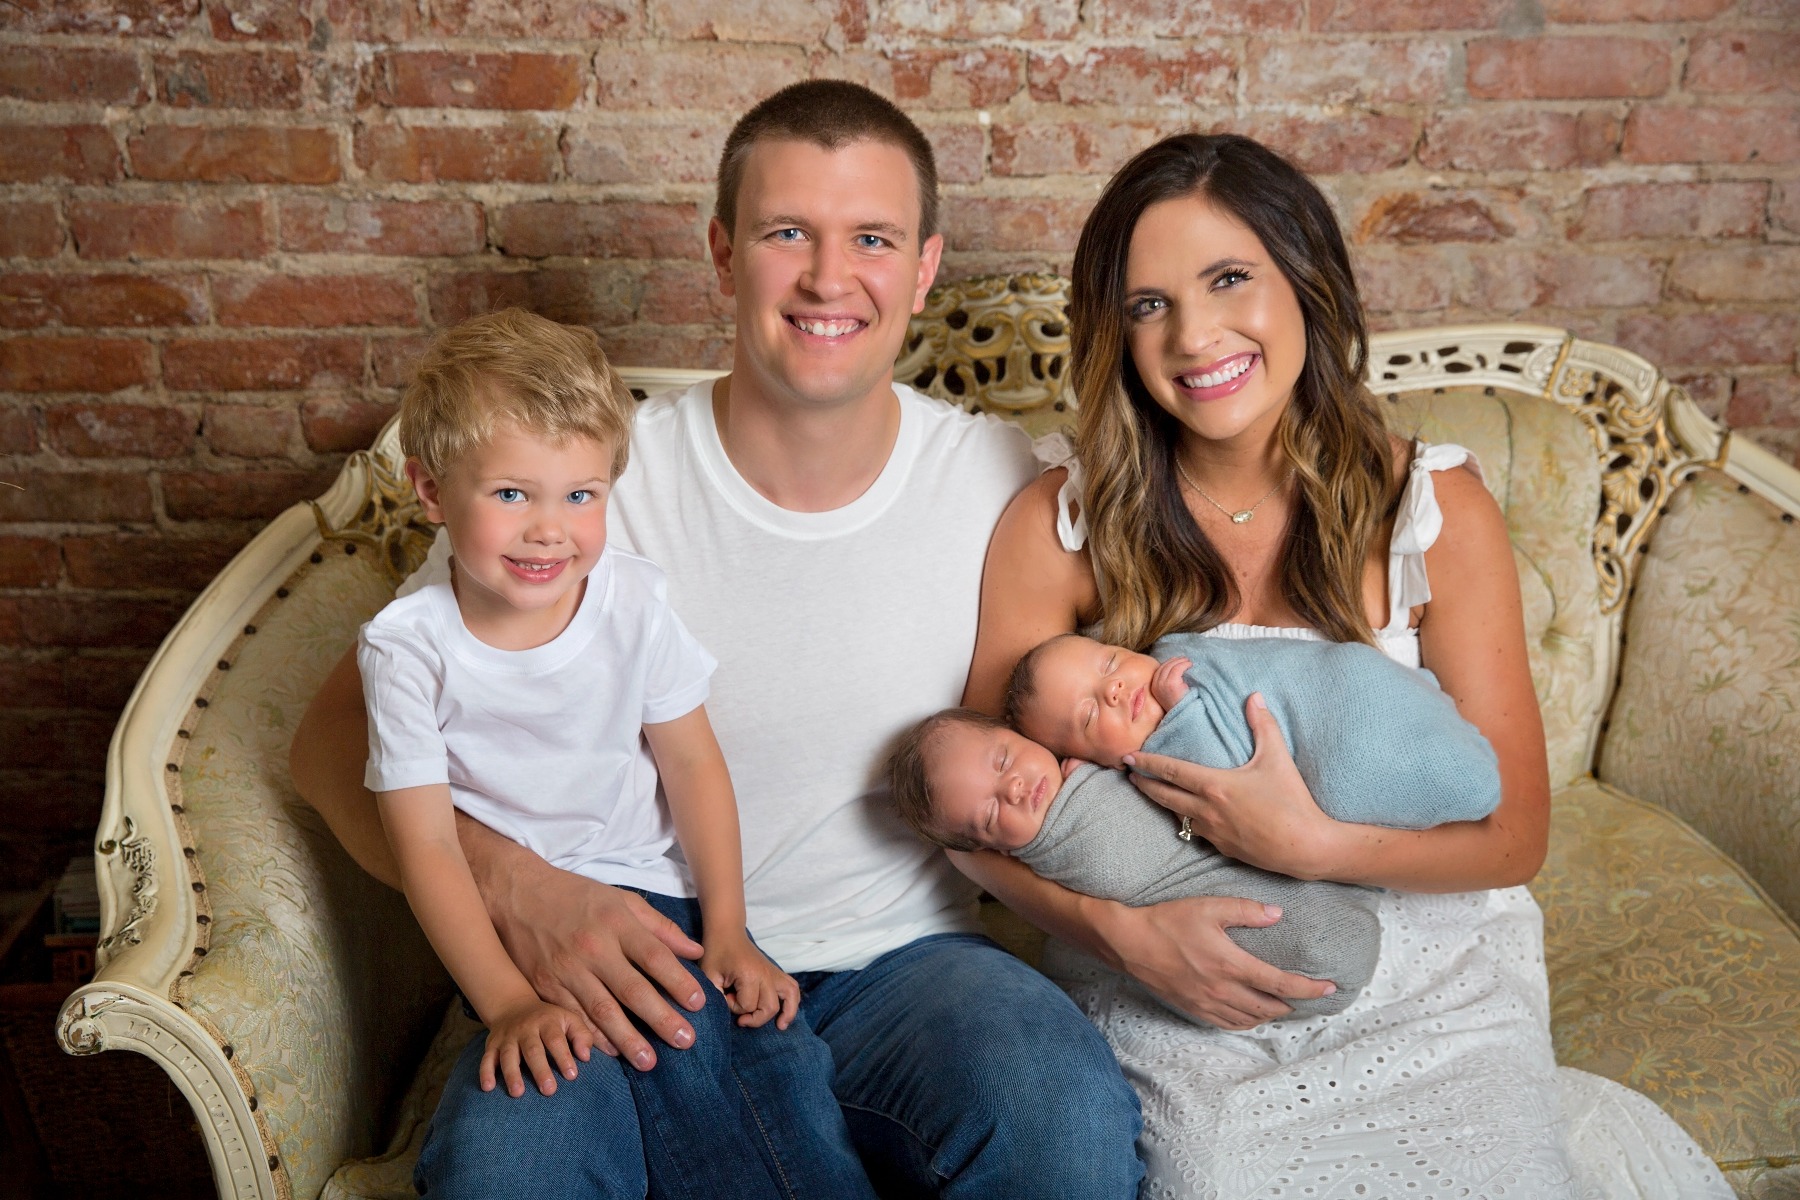 family of 5 on a couch with newborn twins